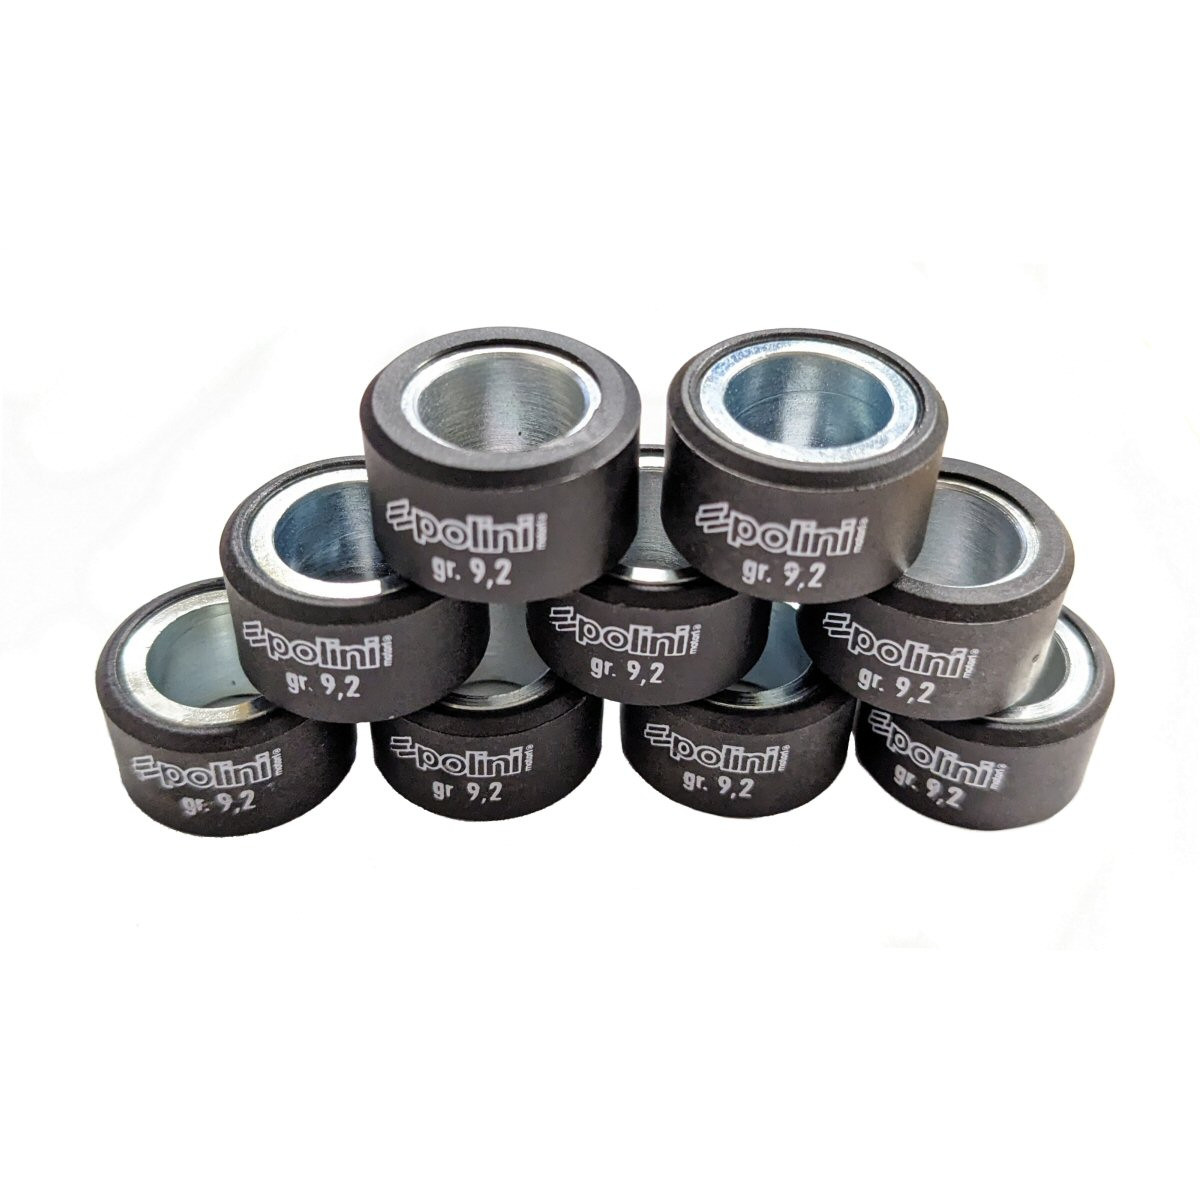 Polini 20×12 Roller Weights – 9.2g